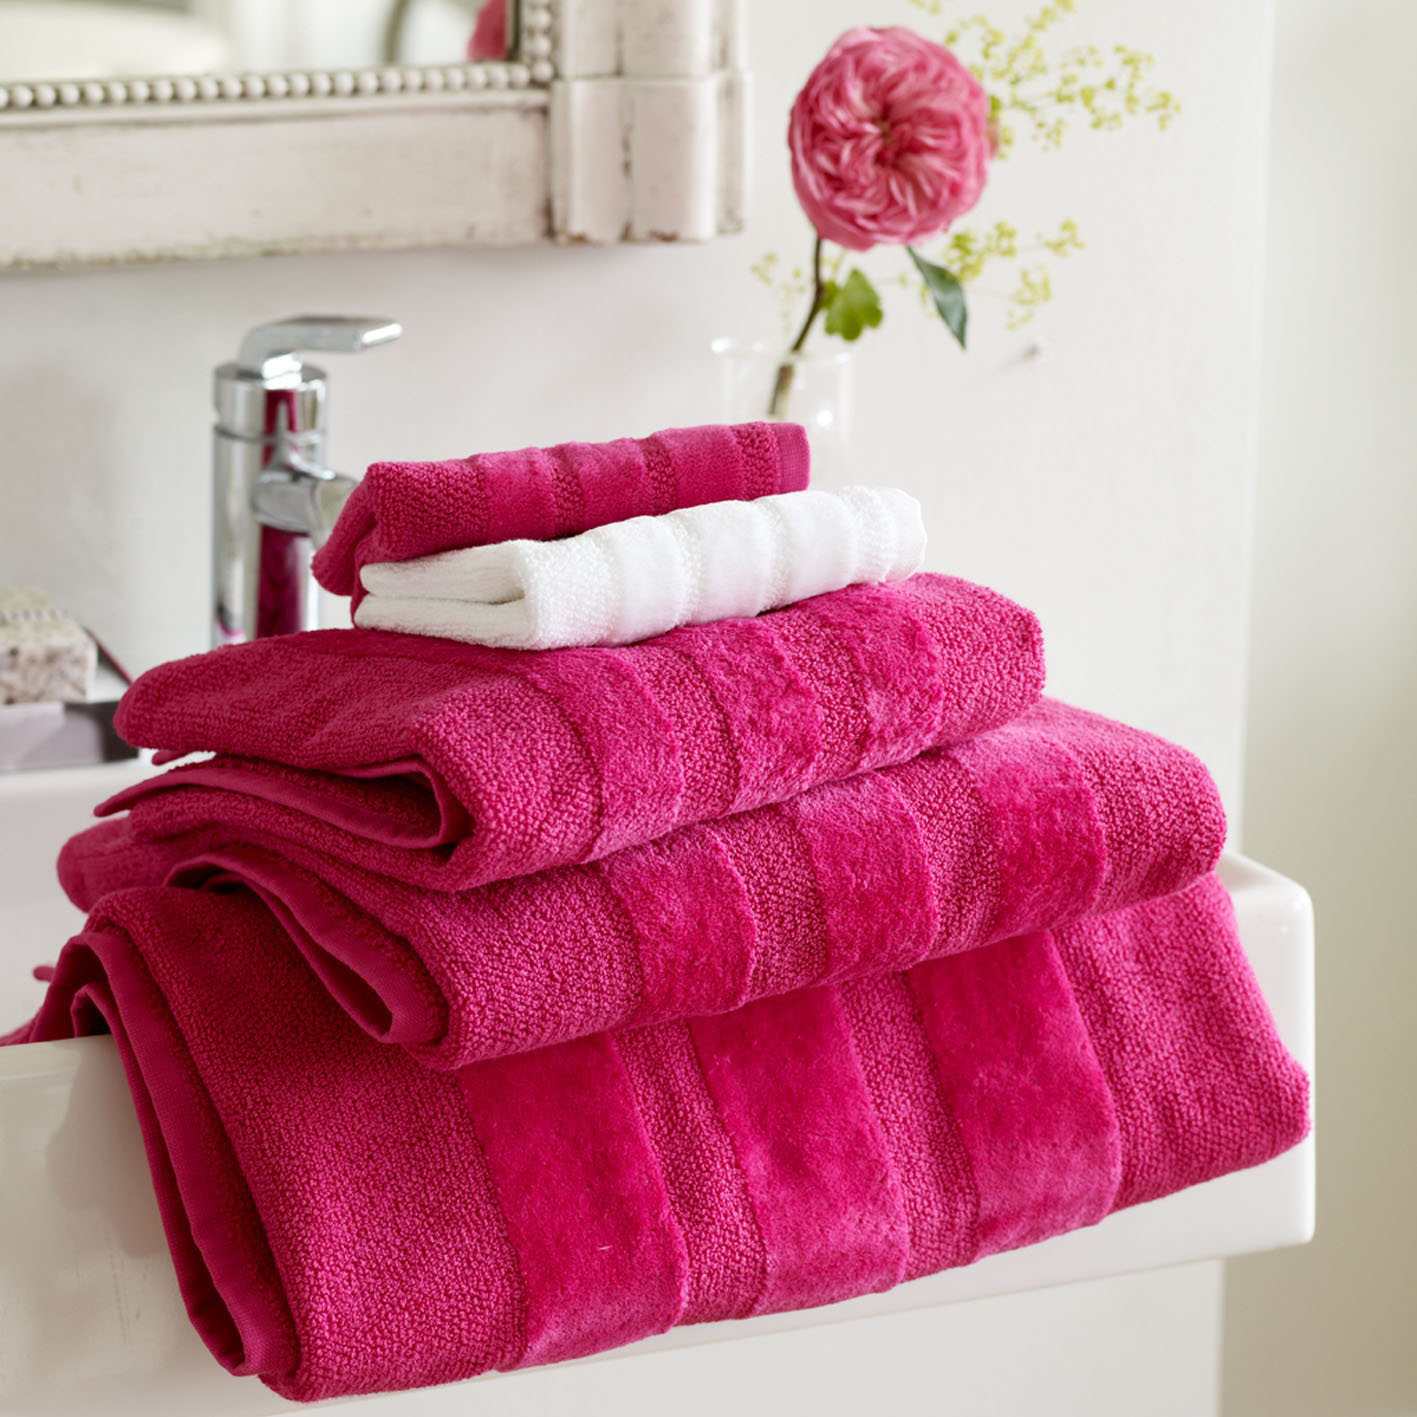 Hard Goods Towels and Robes Buying Agency in Jaipur